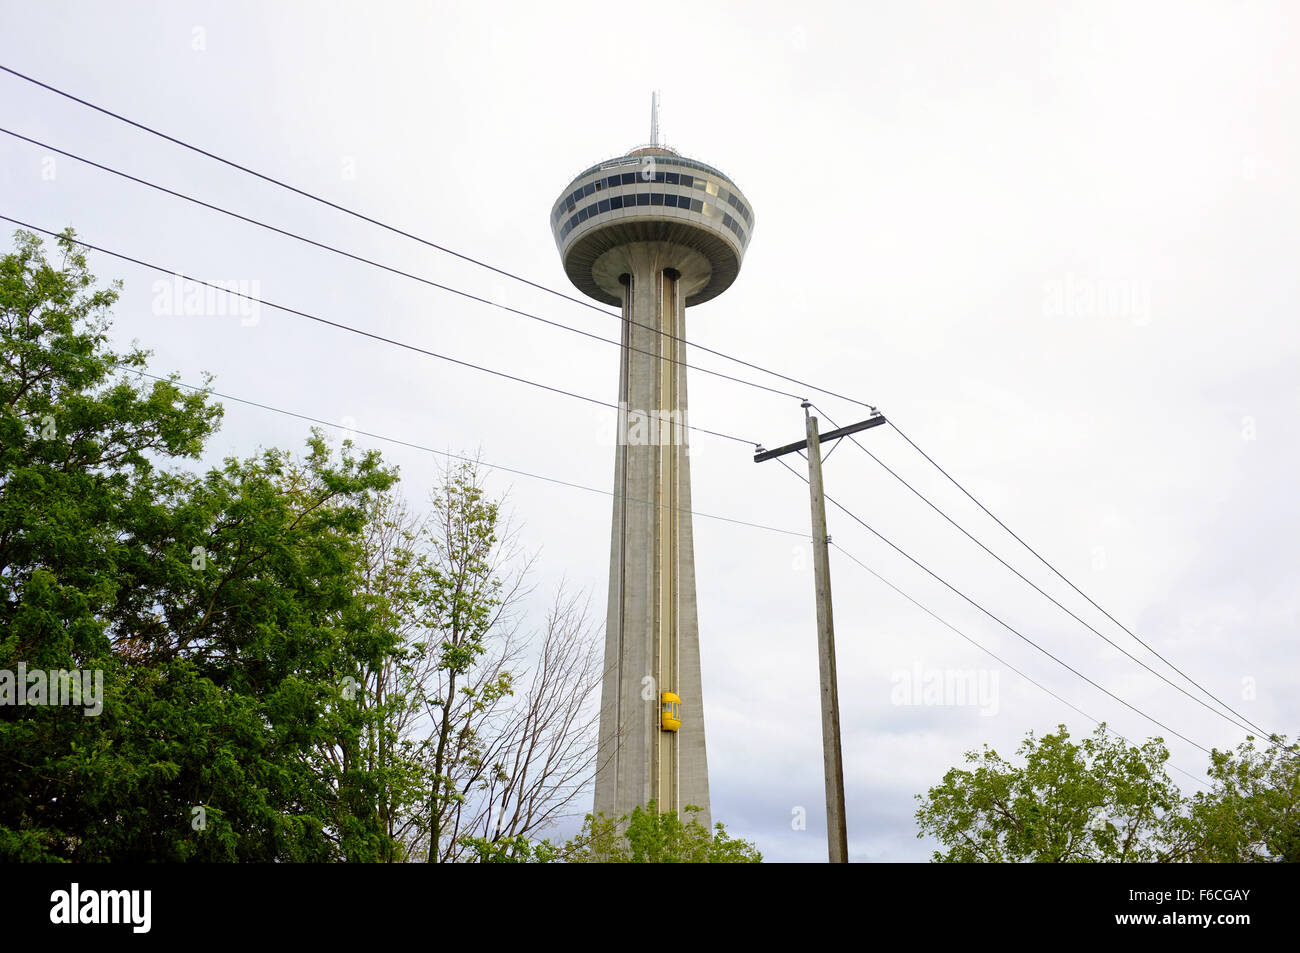 The Skylon observation Tower in the Canadian city of Niagara Falls in Ontario. Stock Photo